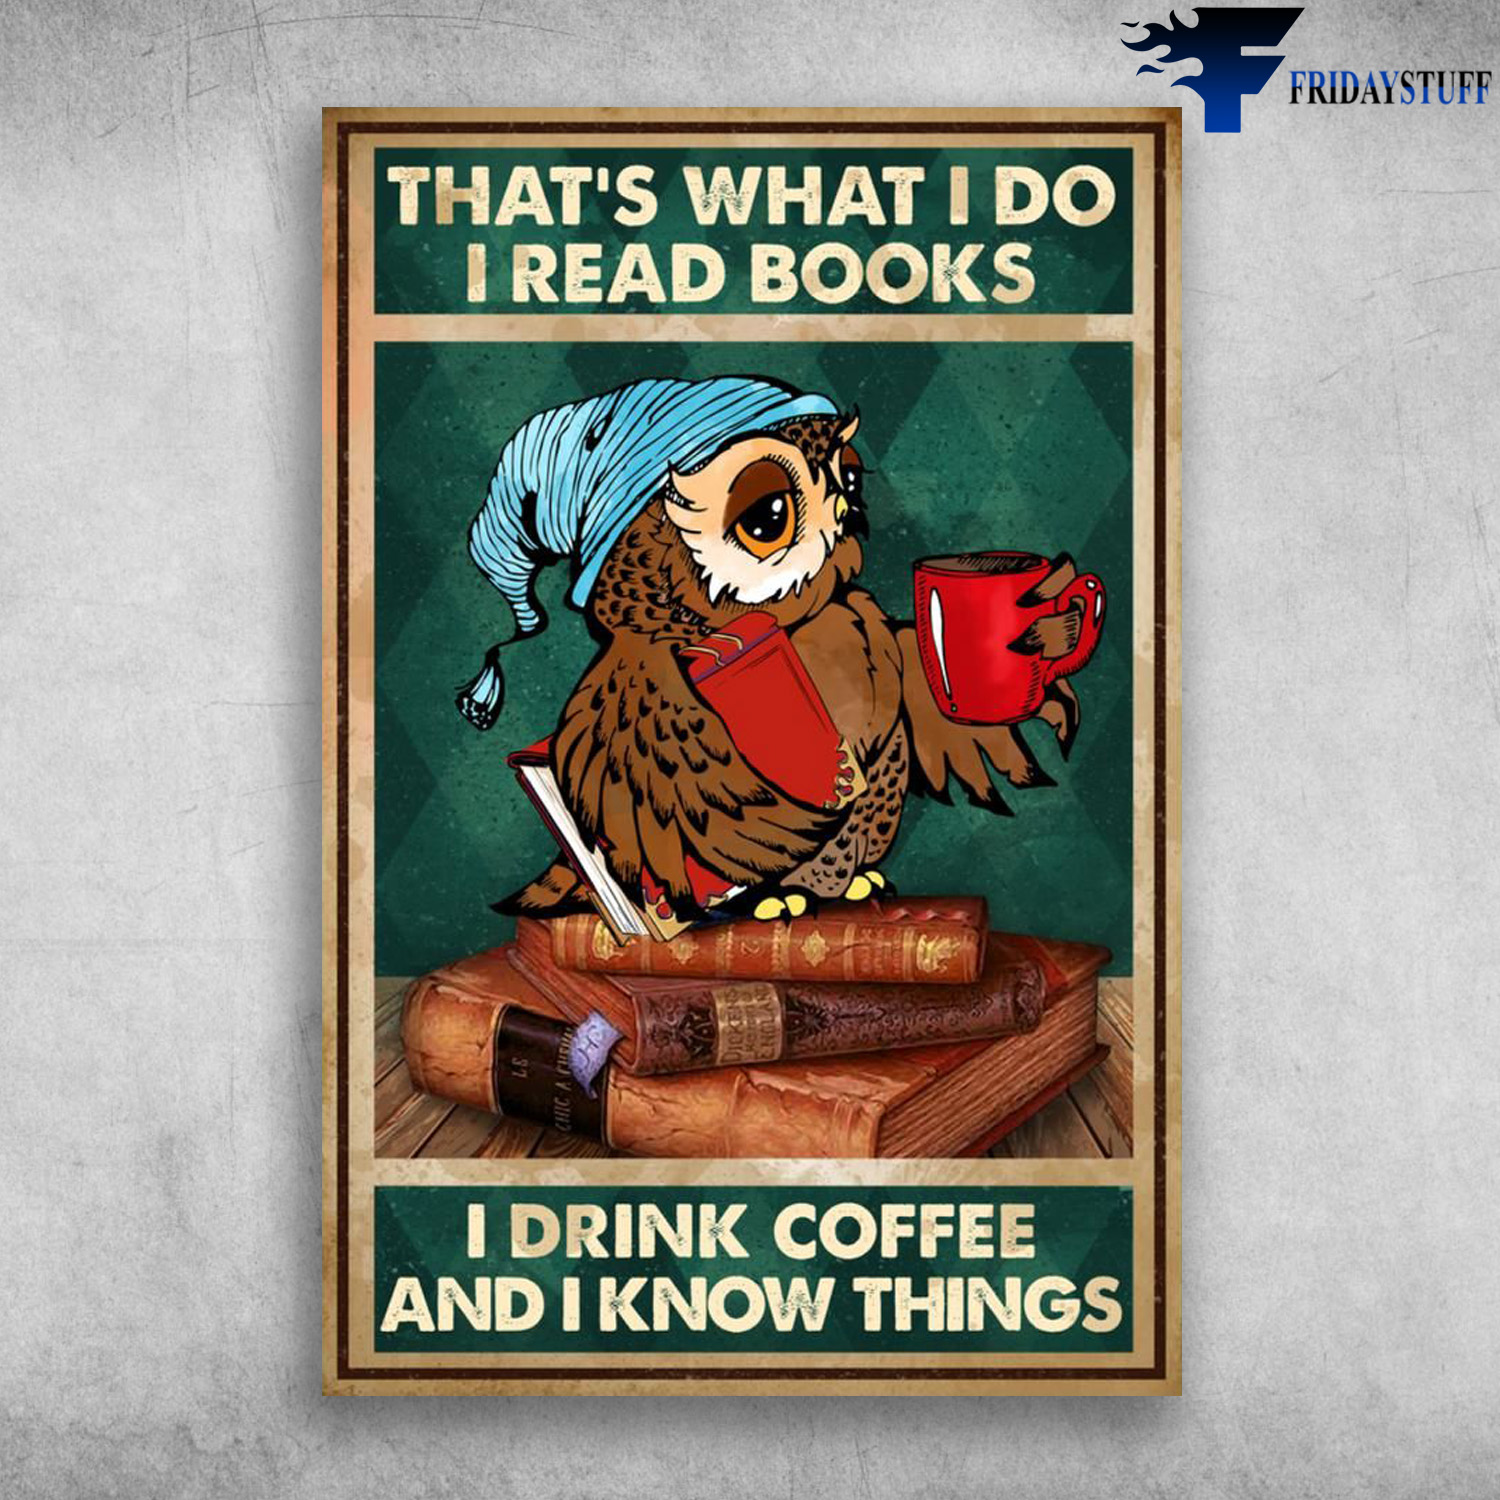 The Owl Reads Book And Drinks Coffee - That's What I Do, I Read Books, I Drink Coffee And I Know Things